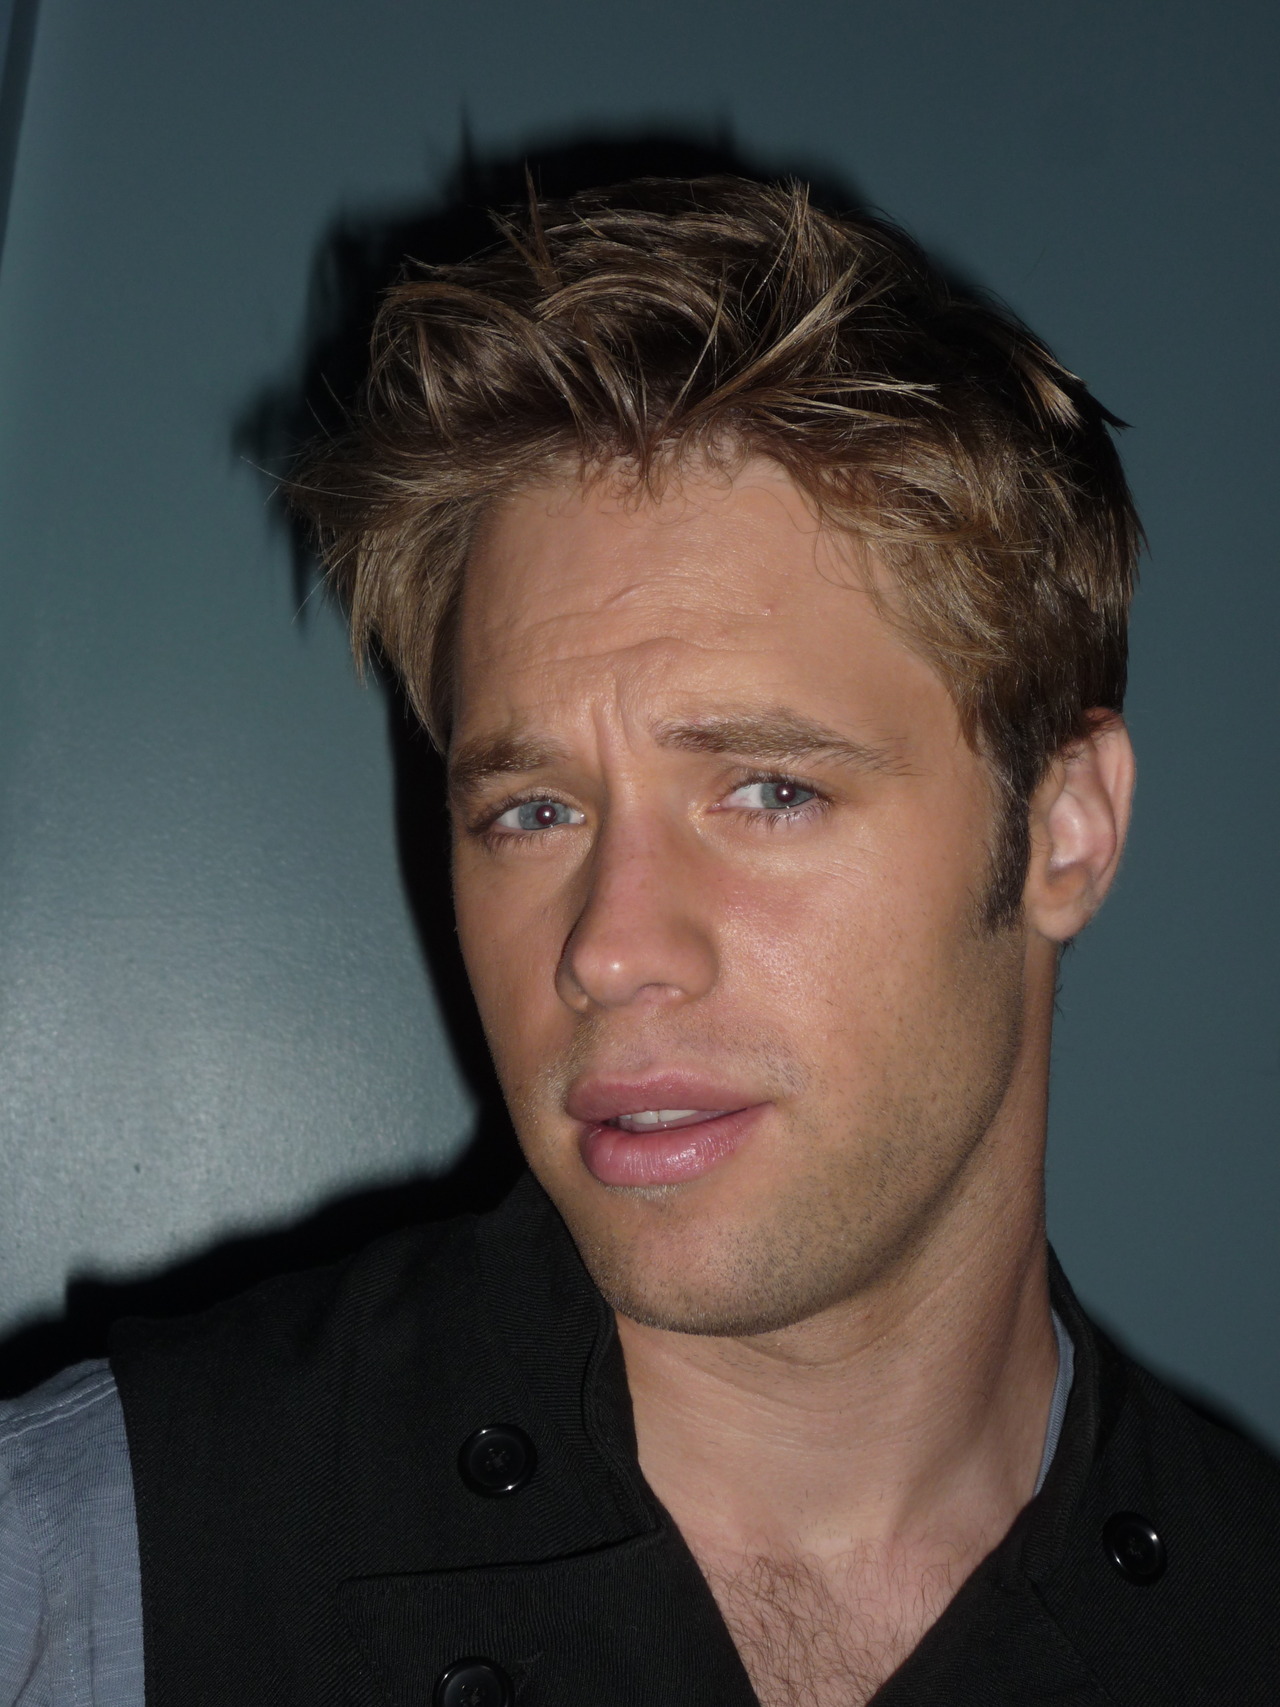 Melrose Place/ Shaun Sipos/ Hair Cut and Style